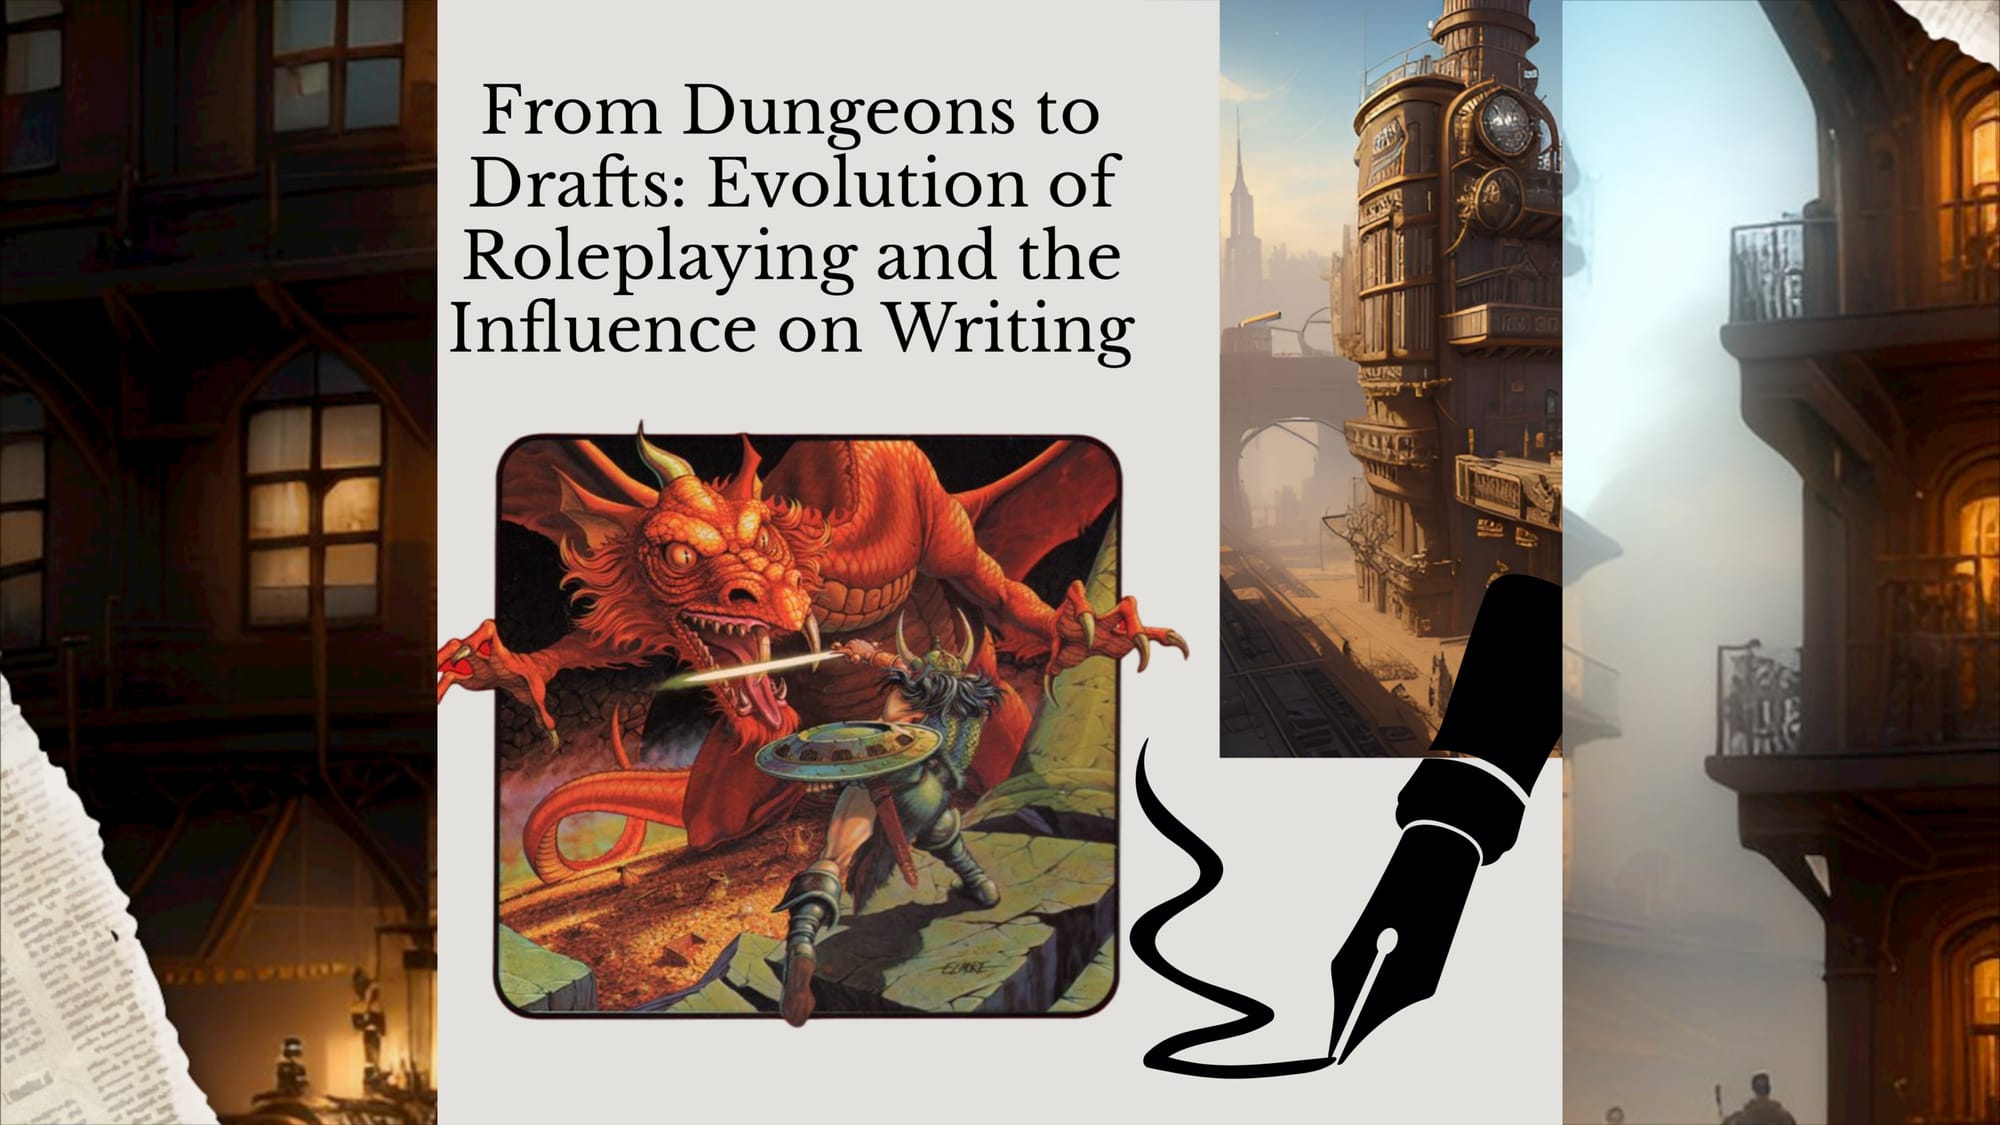 From Dungeons to Drafts: Evolution of Roleplaying and Its Influence on Writing